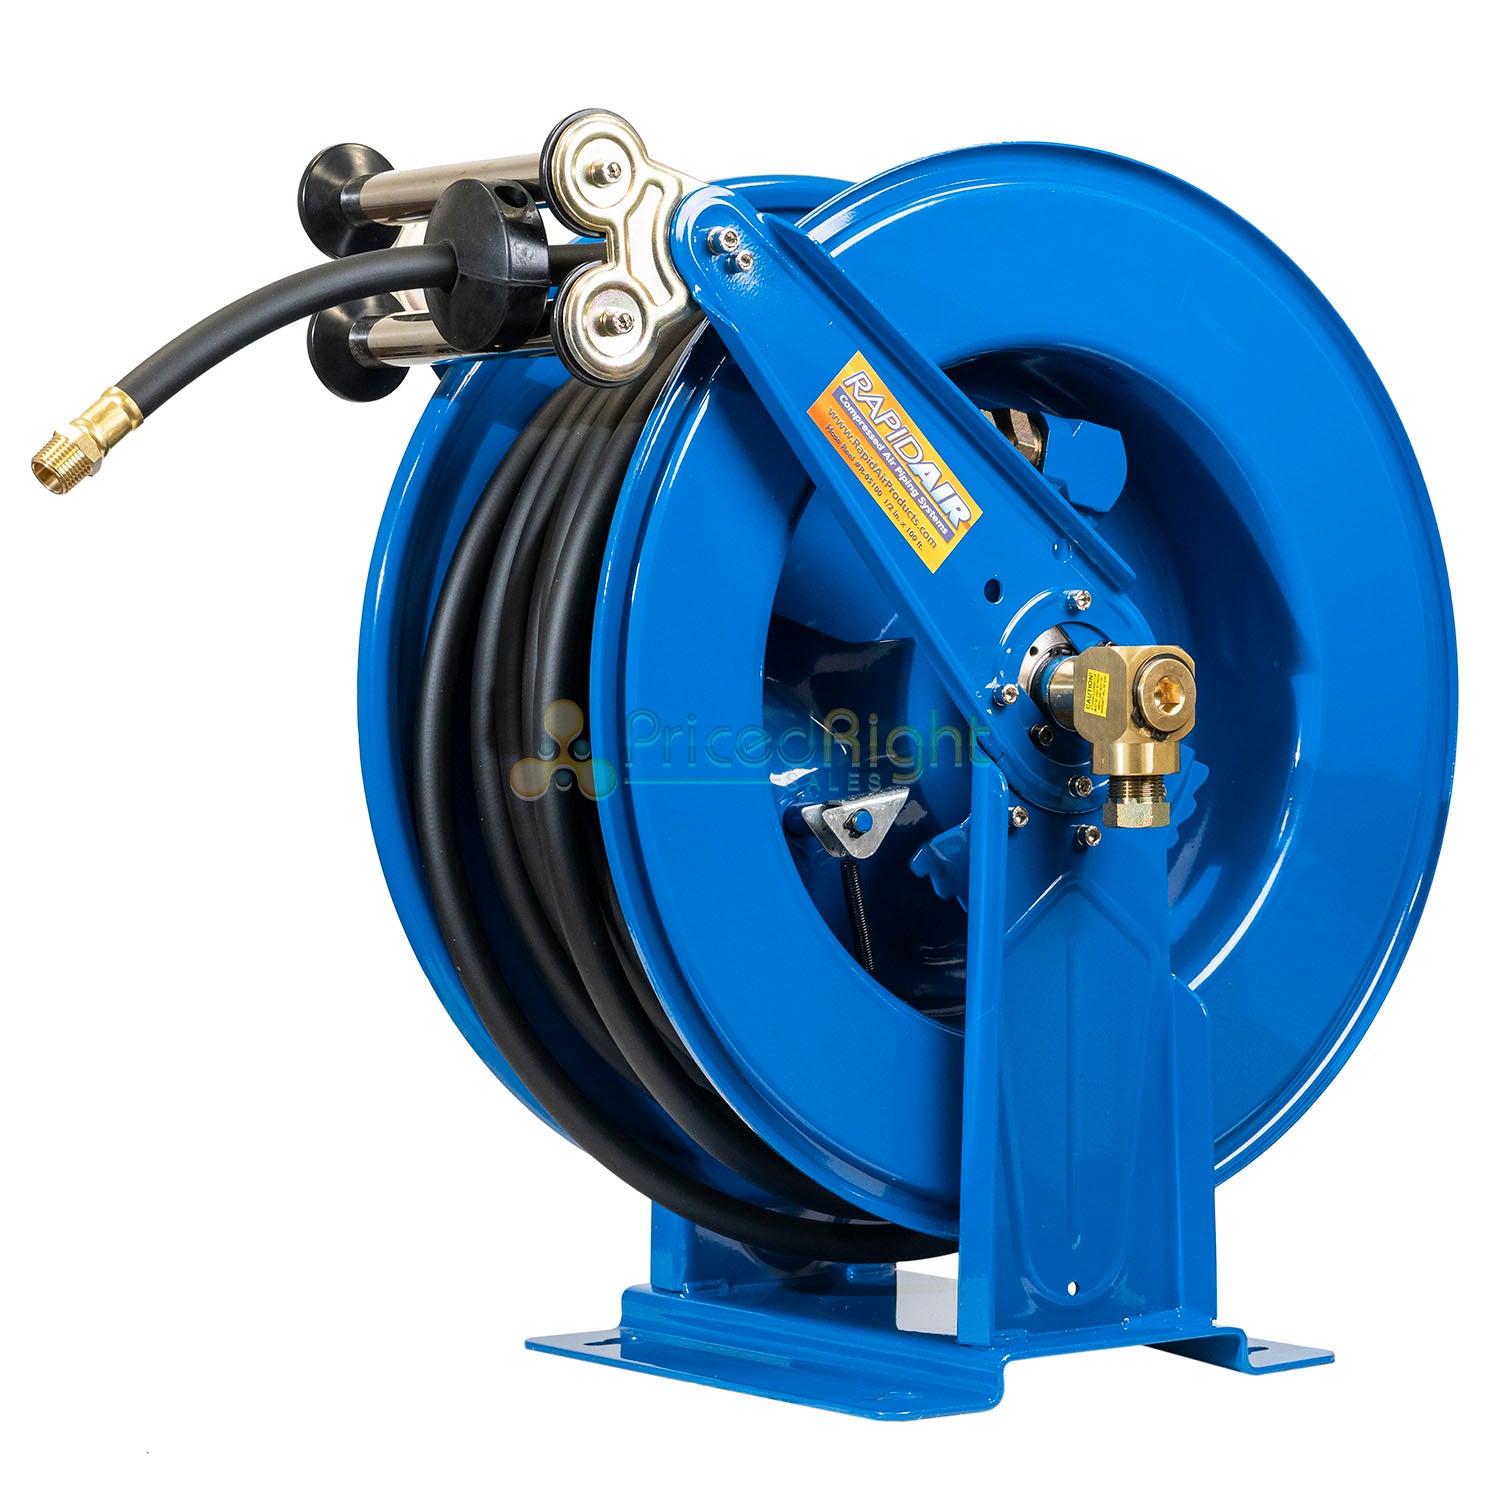 Rapidair 1/2 x 100' Dual Arm Steel Hose Reel 1/2 Inlet and Outlet R-05100  Rapidair 1/2 x 100' Dual Arm Steel Hose Reel 1/2 Inlet and Outlet